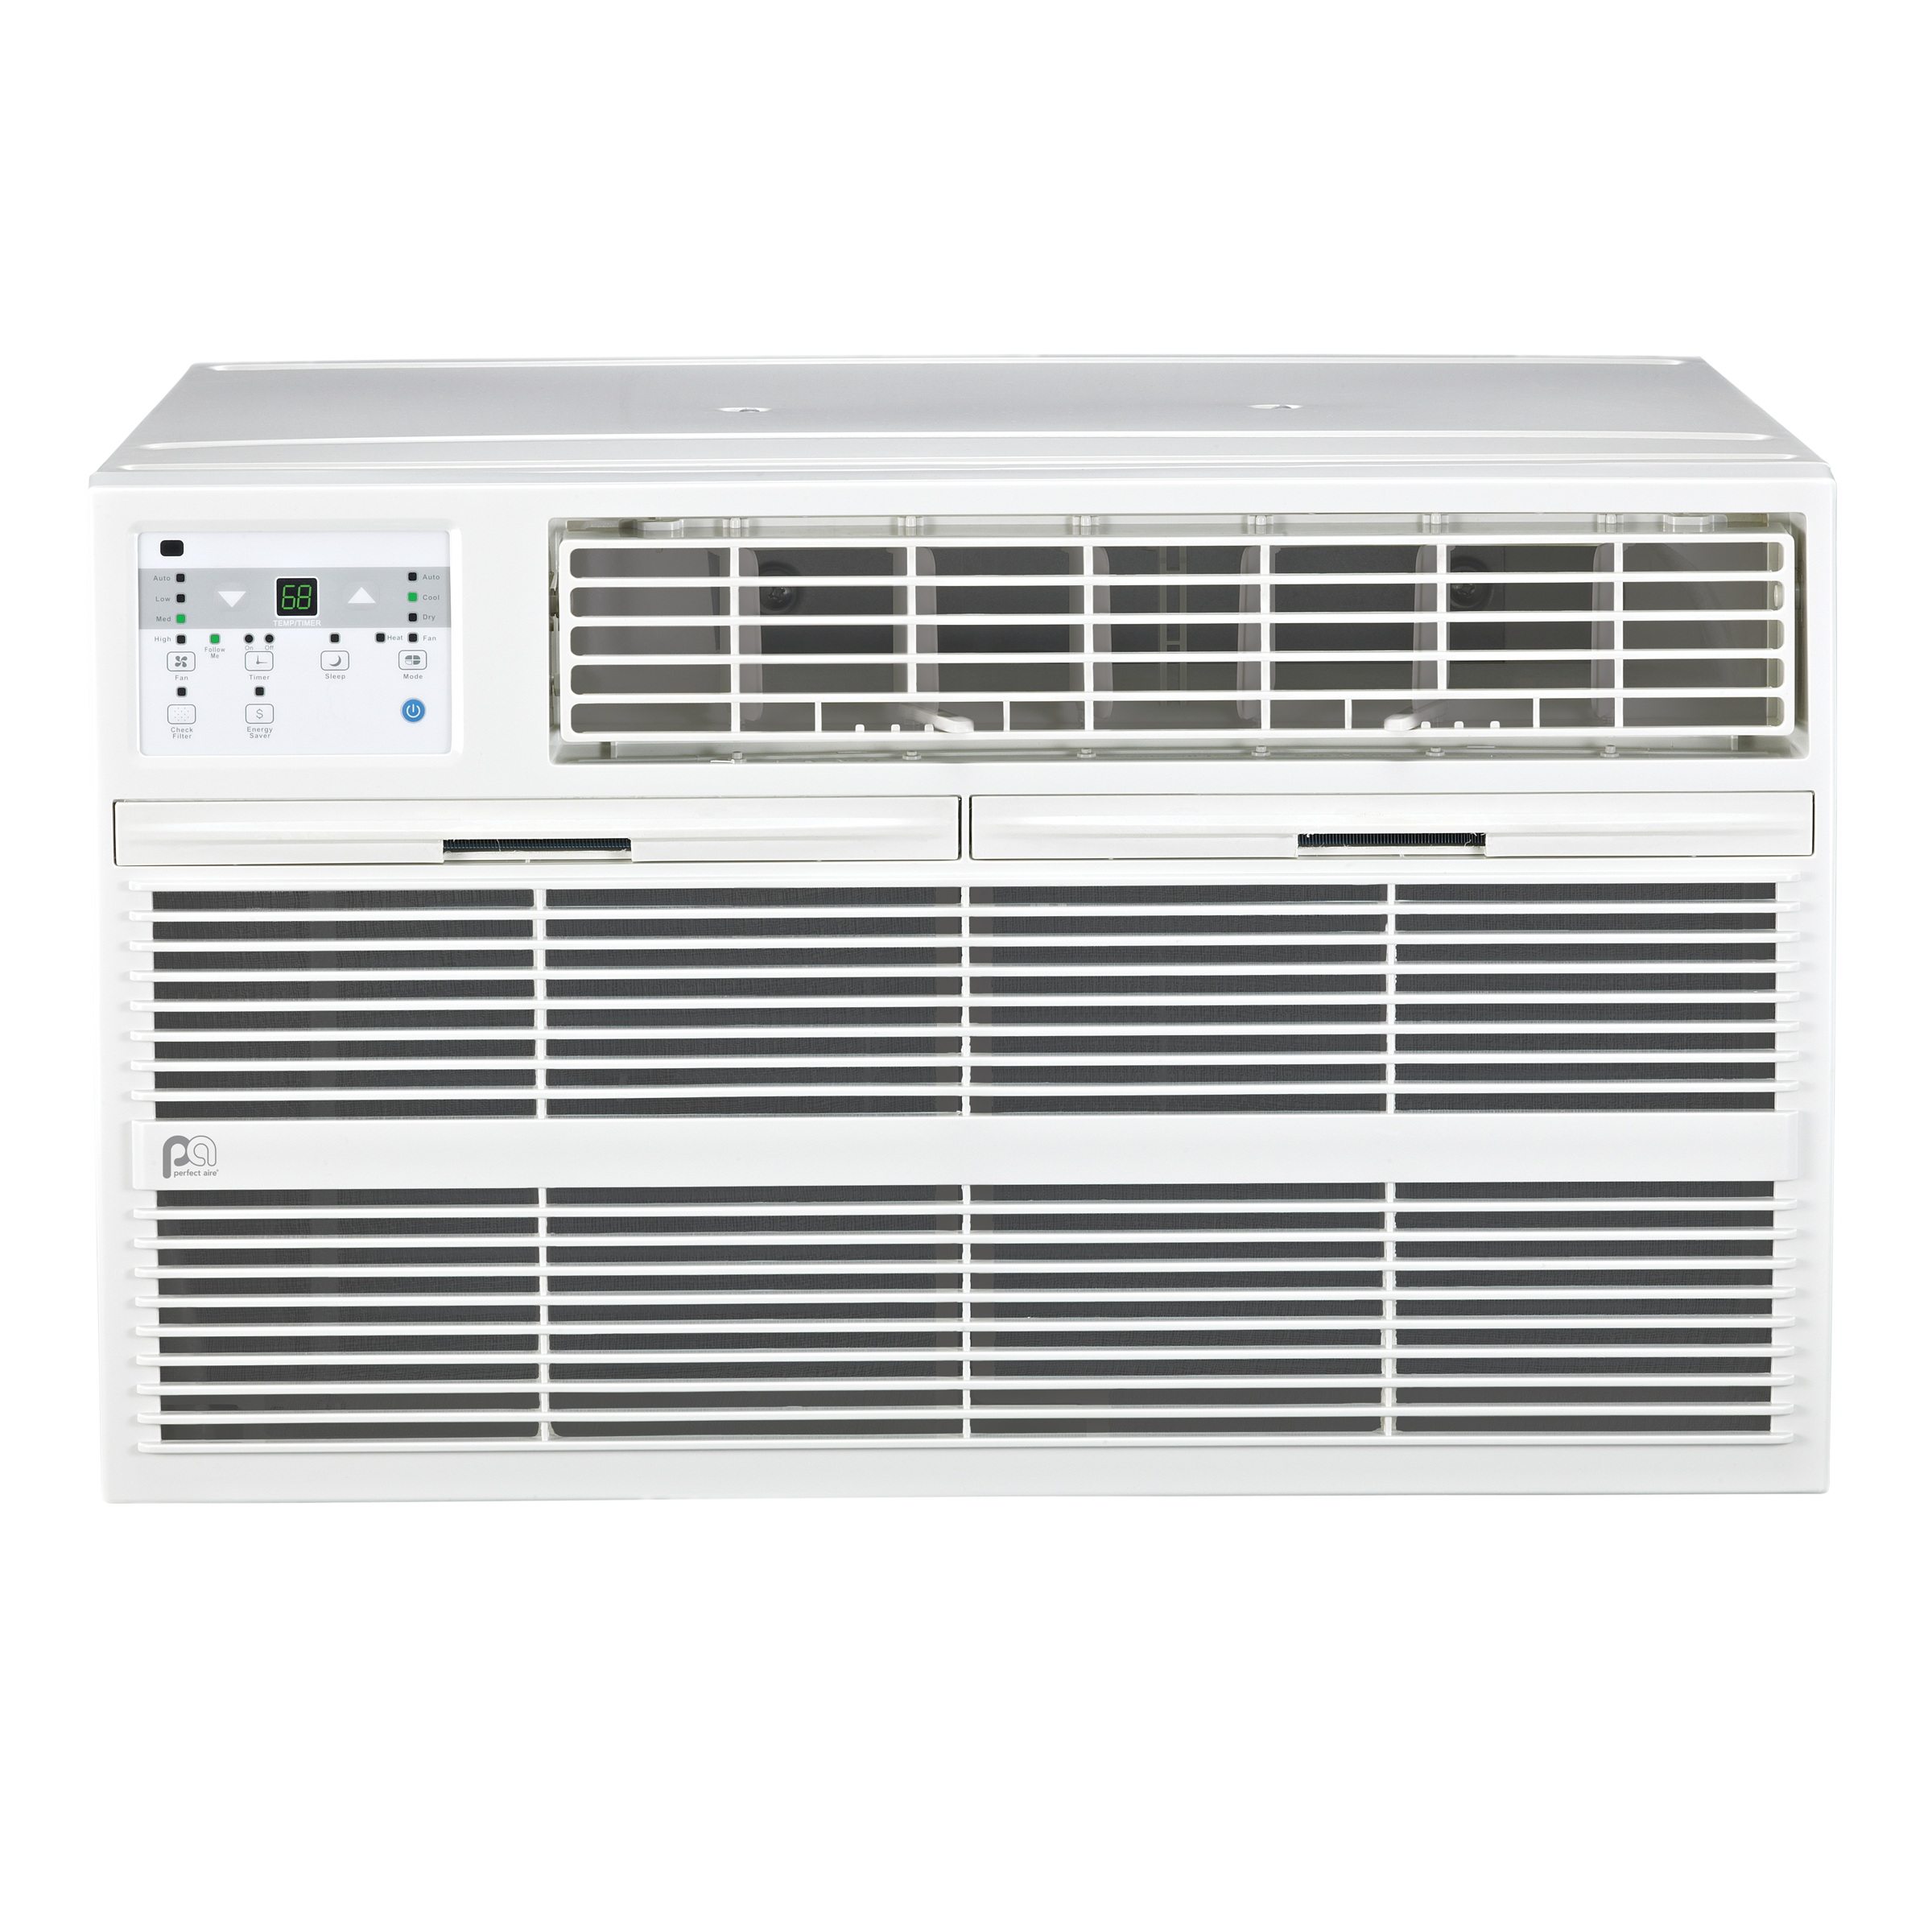 3PATWH14002 Perfect Aire 14,000 BTU Thru-the-Wall Air Conditioner with Electric Heater, Sq. ft: 550-700 Coverage, With Remote Control